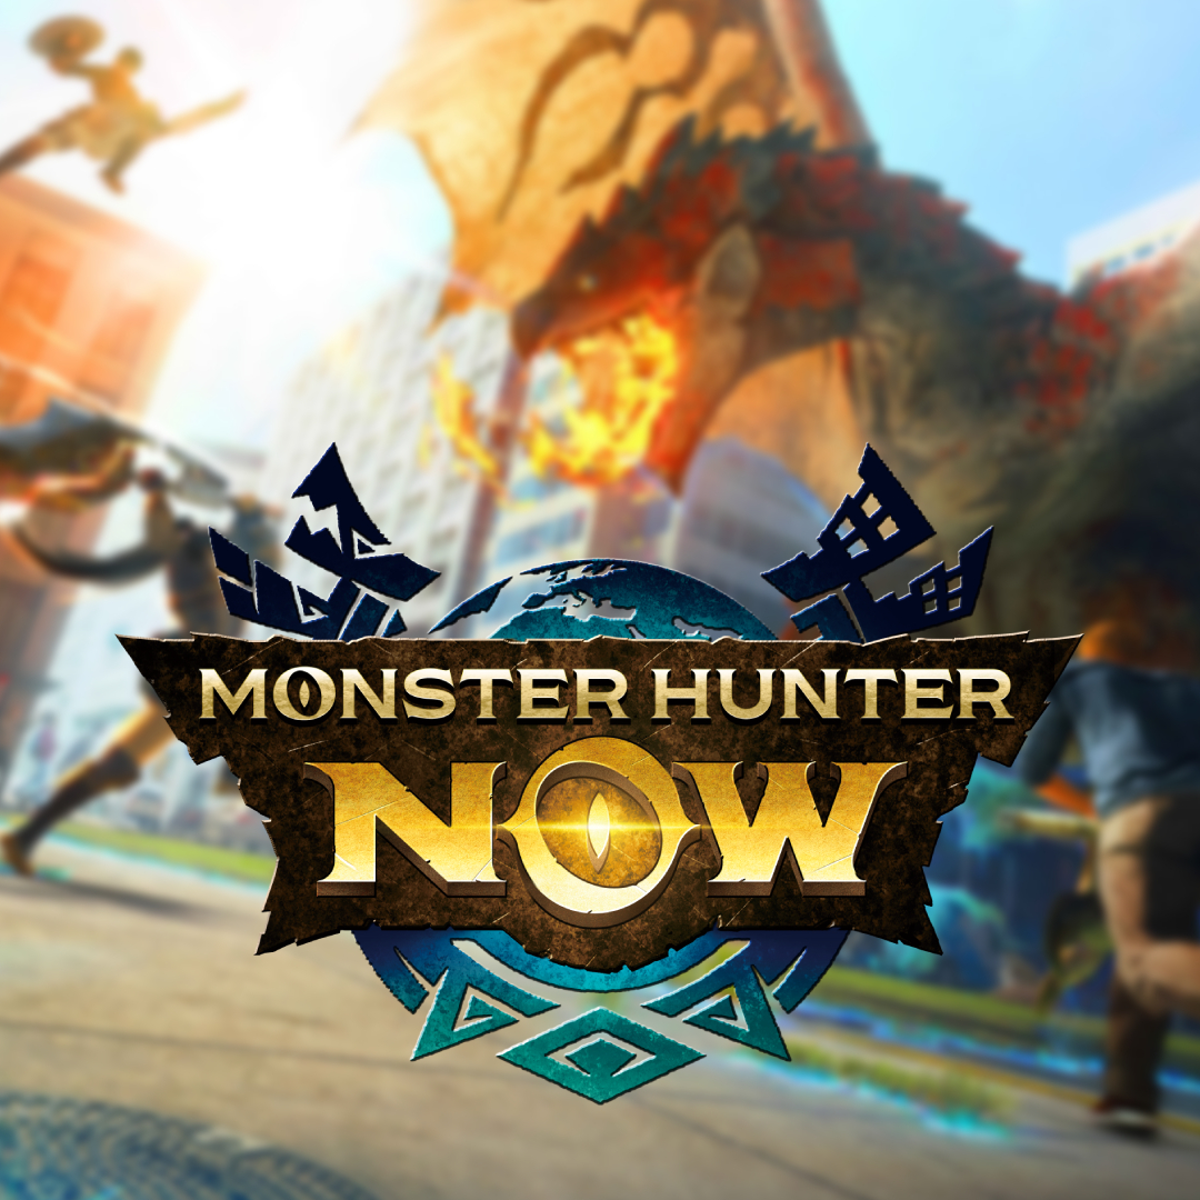 Monster Hunter Now, with the potential of a true Pokemon Go